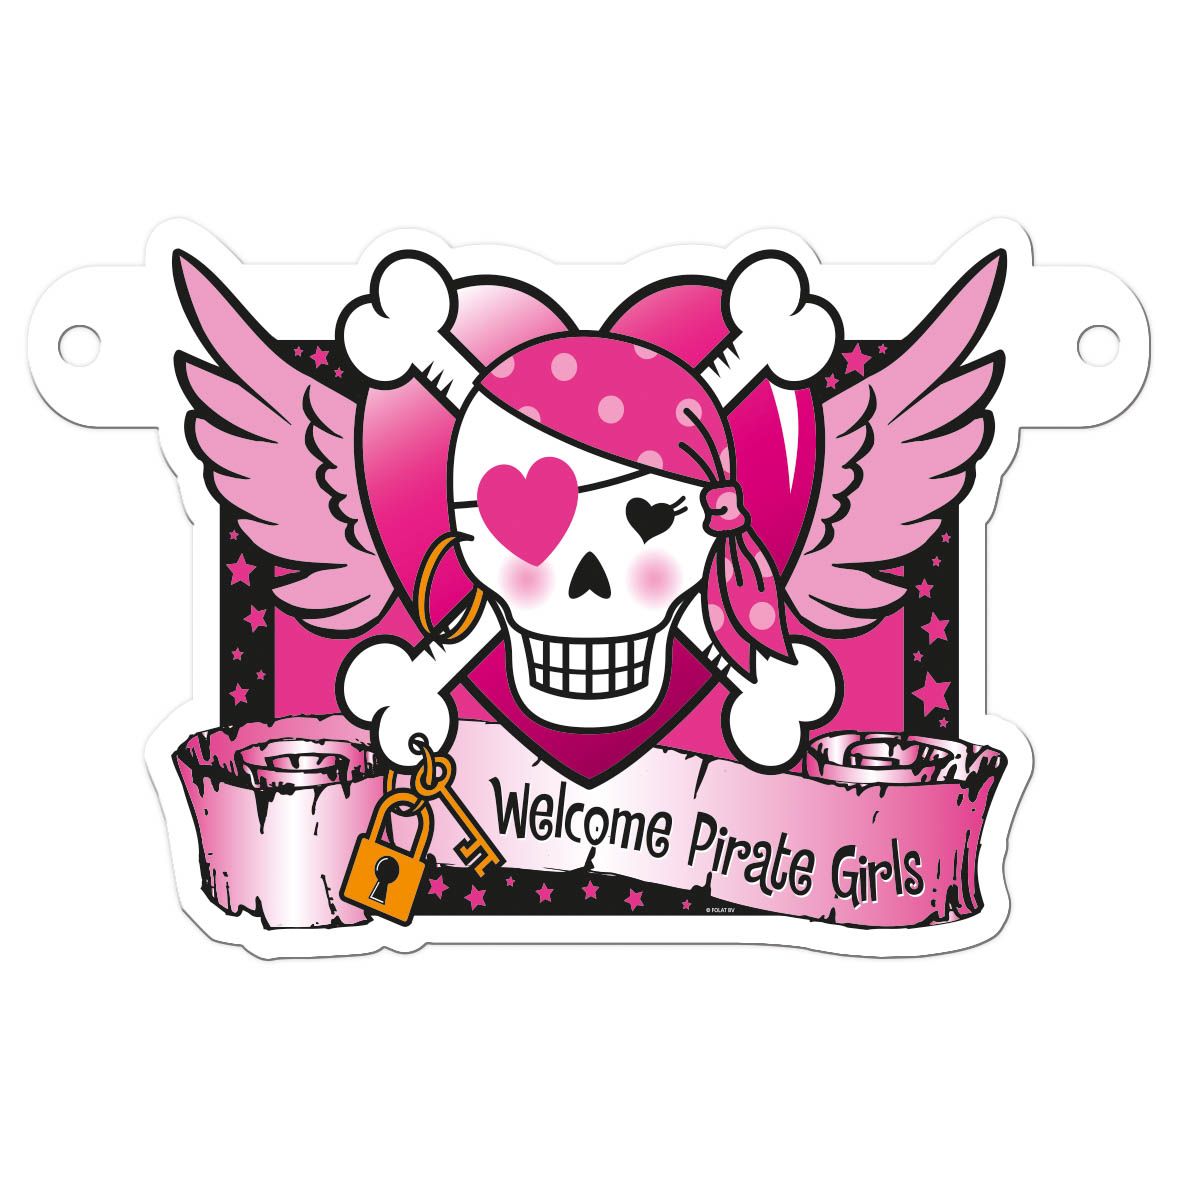 Banner Pink Pirate girl